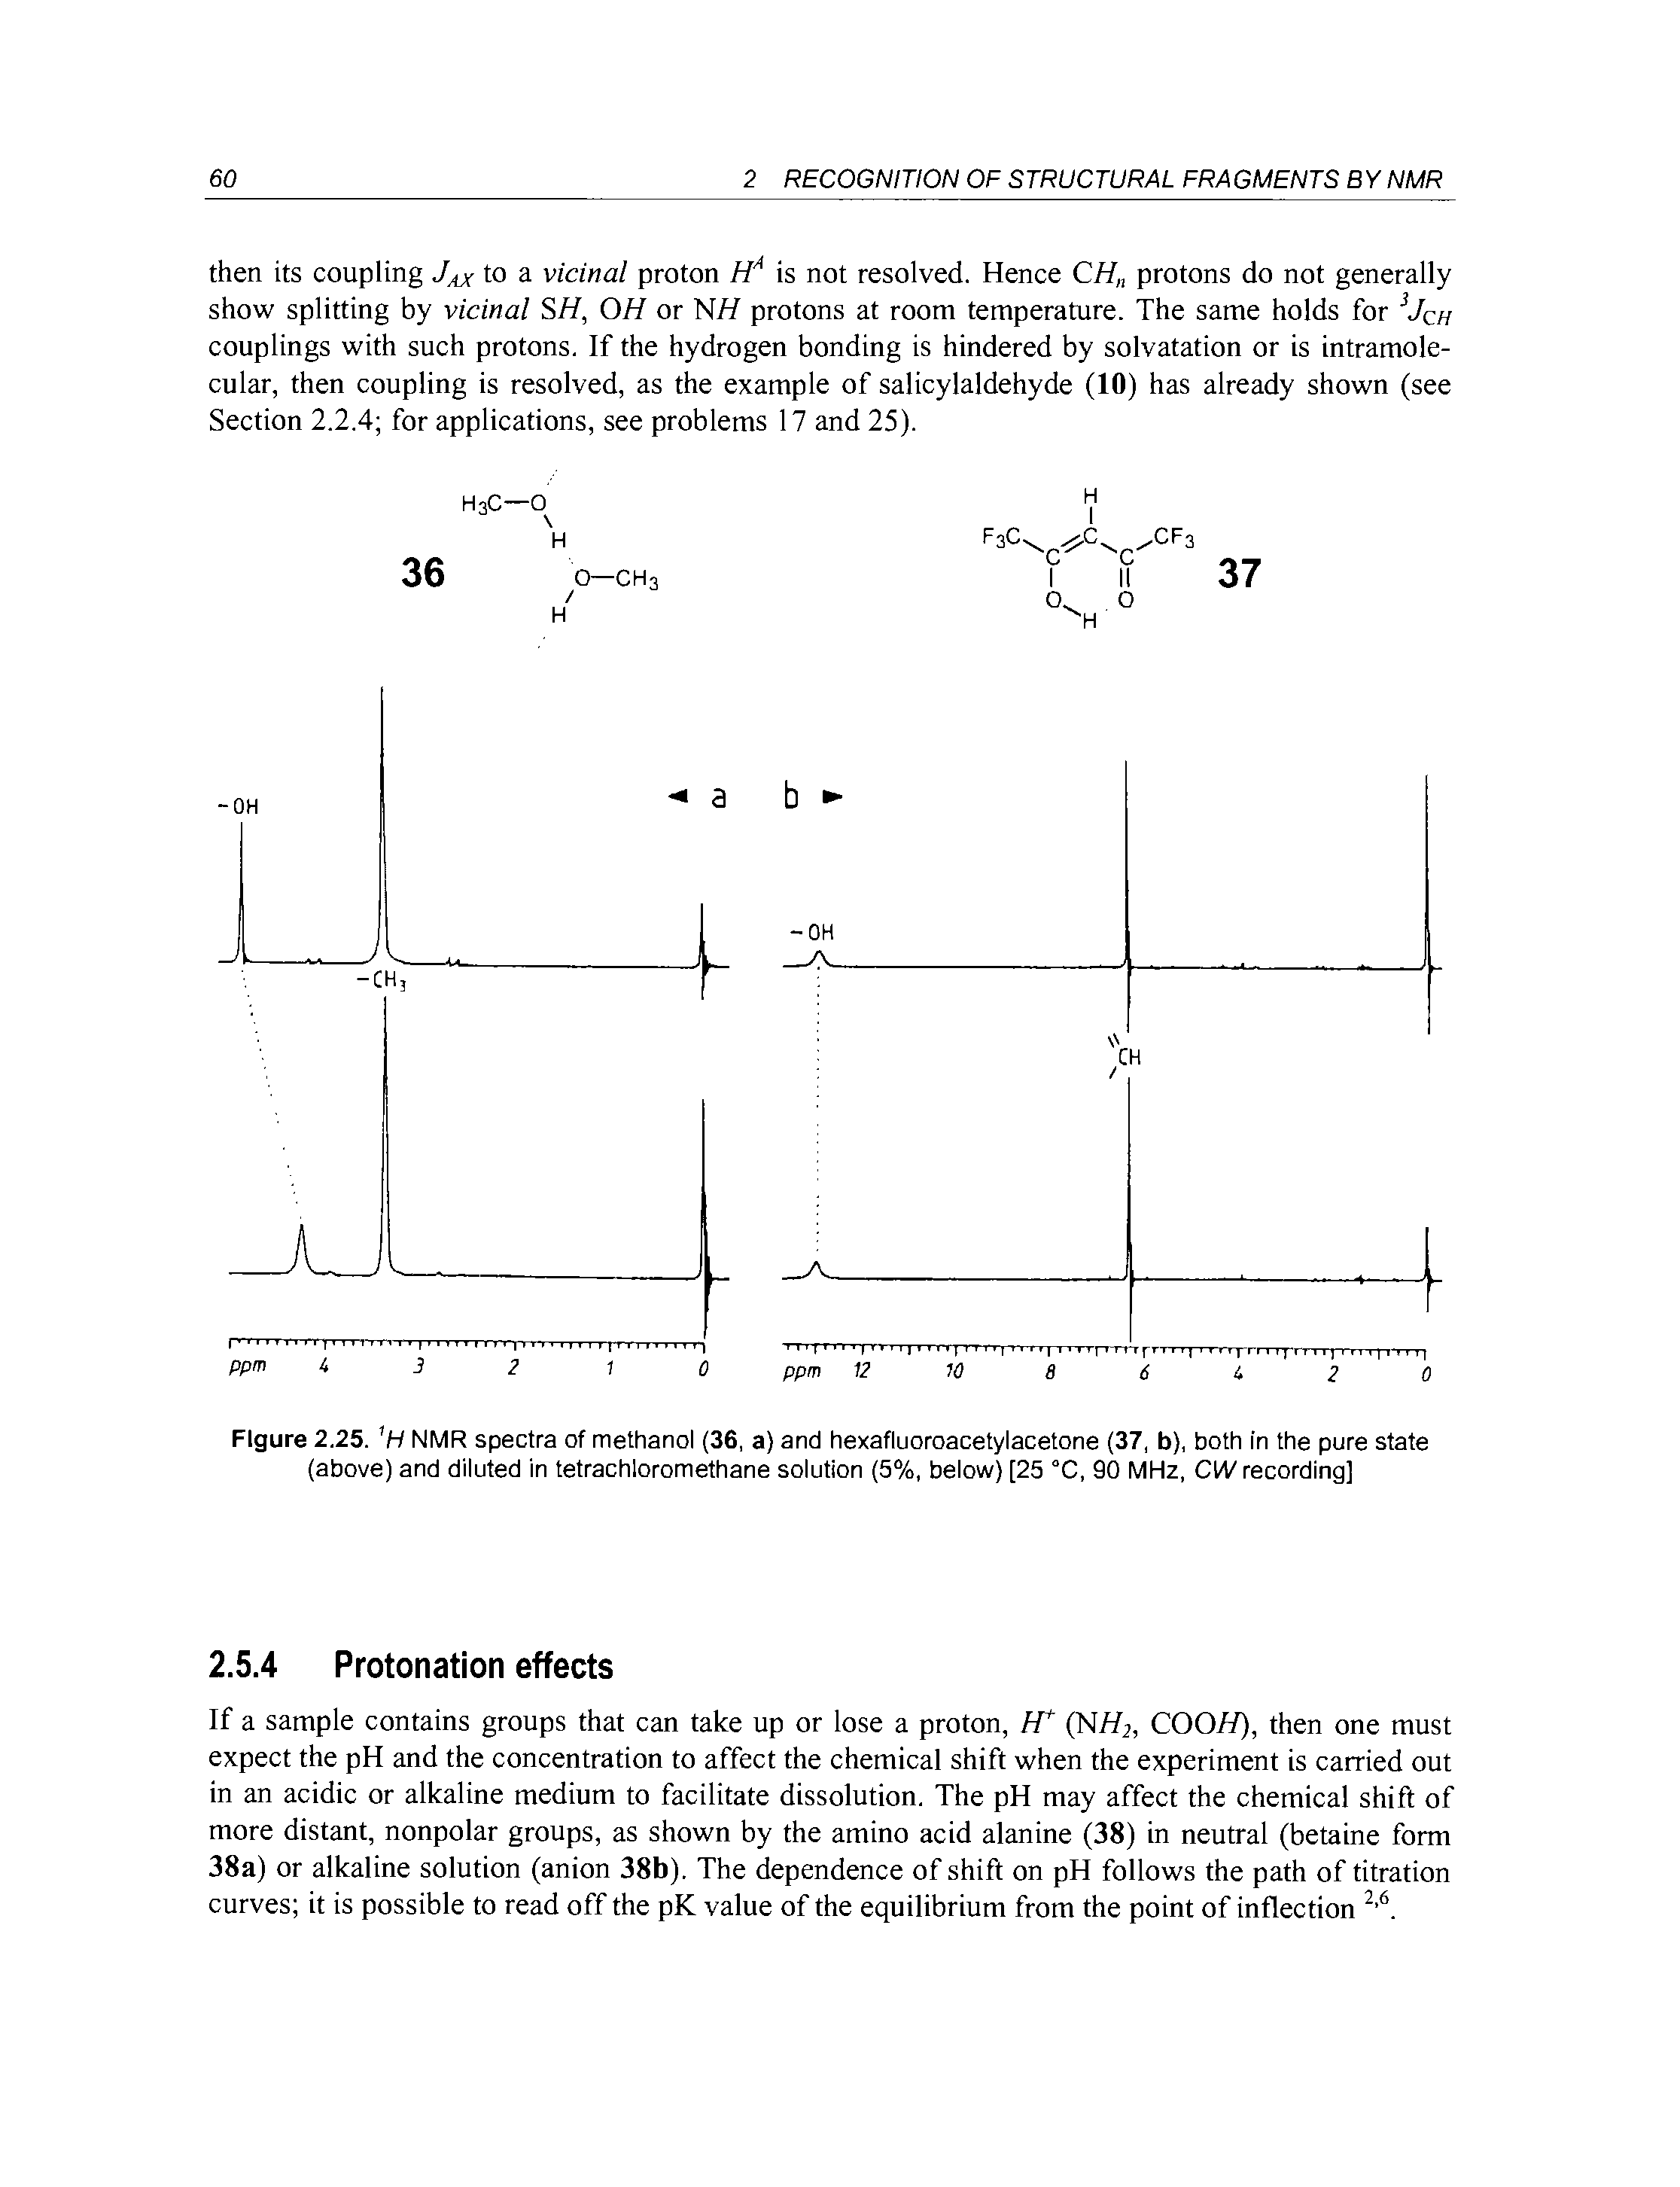 Figure 2.25. H NMR spectra of methanol (36, a) and hexafluoroacetylacetone (37, b), both in the pure state (above) and diluted in tetrachloromethane solution (5%, below) [25 °C, 90 MHz, CW recording]...